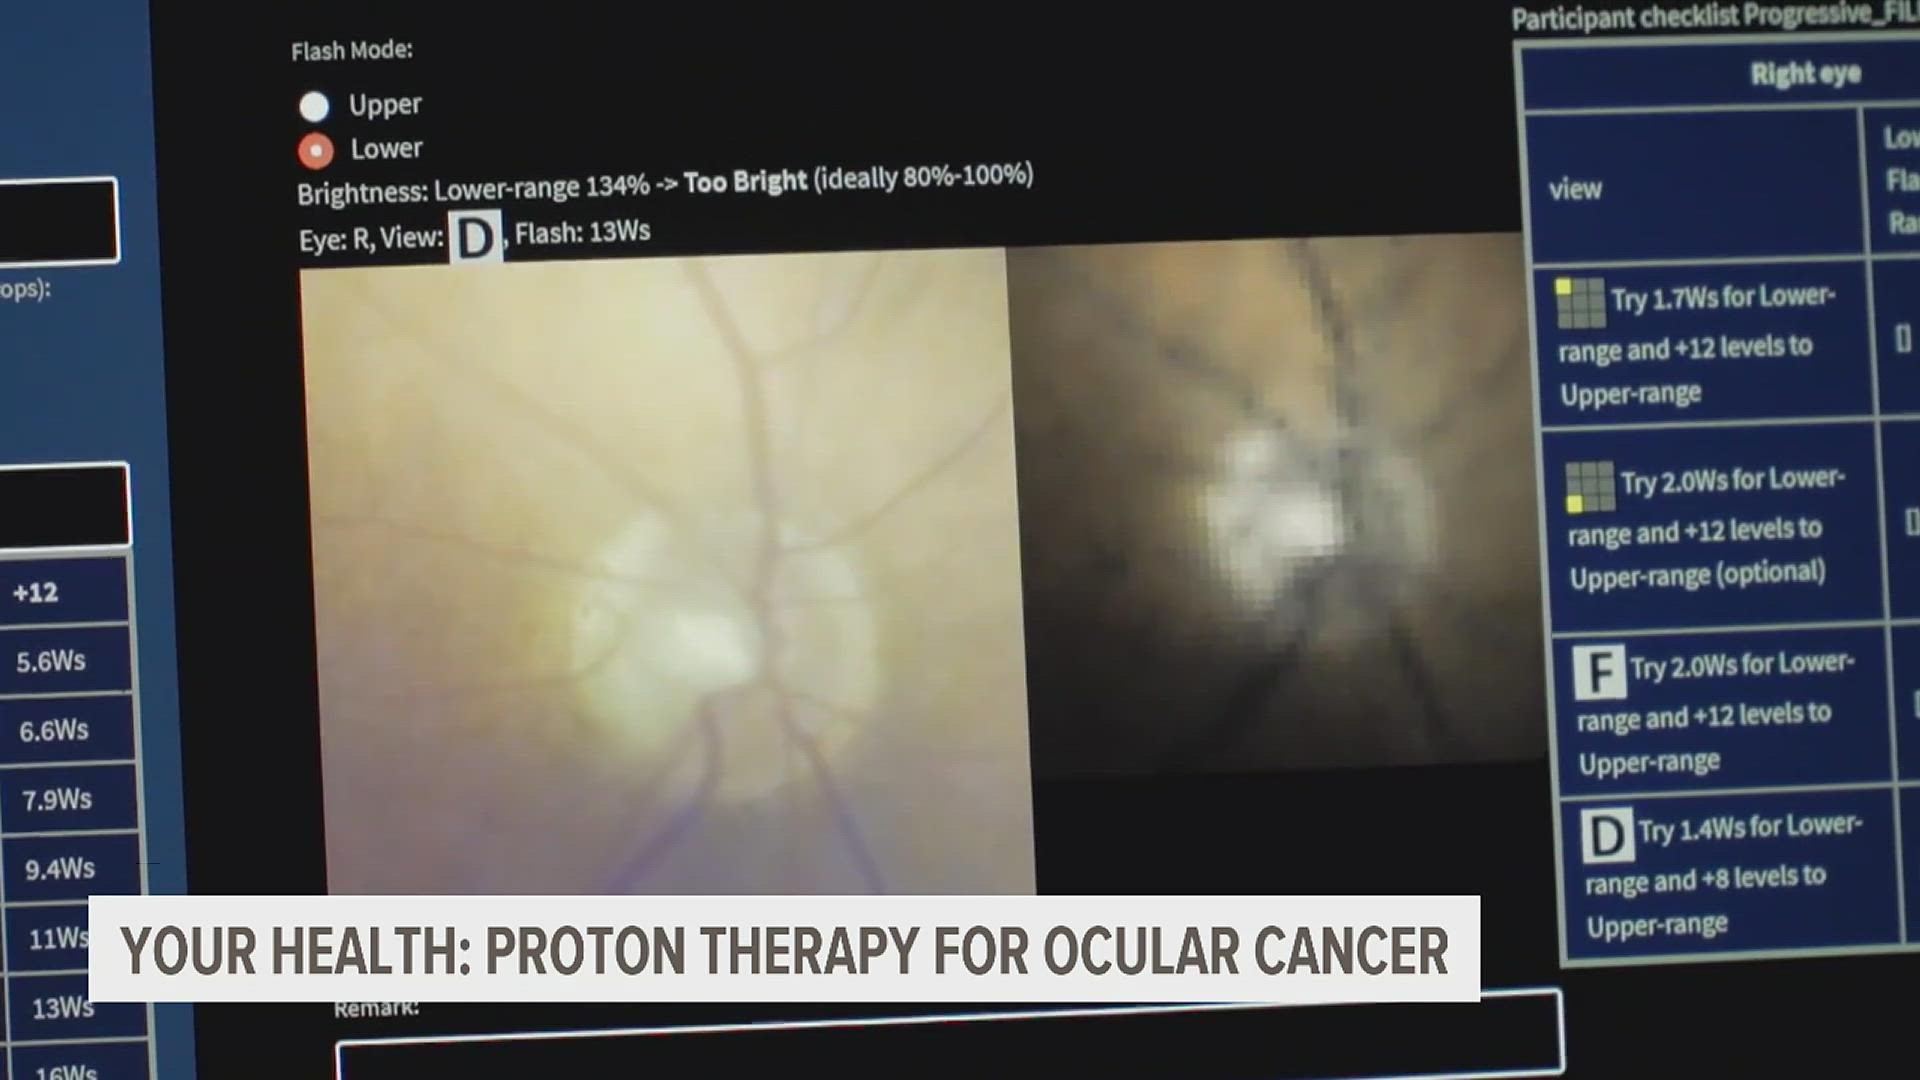 When treated early, proton therapy can cure almost 95% of ocular cancers.